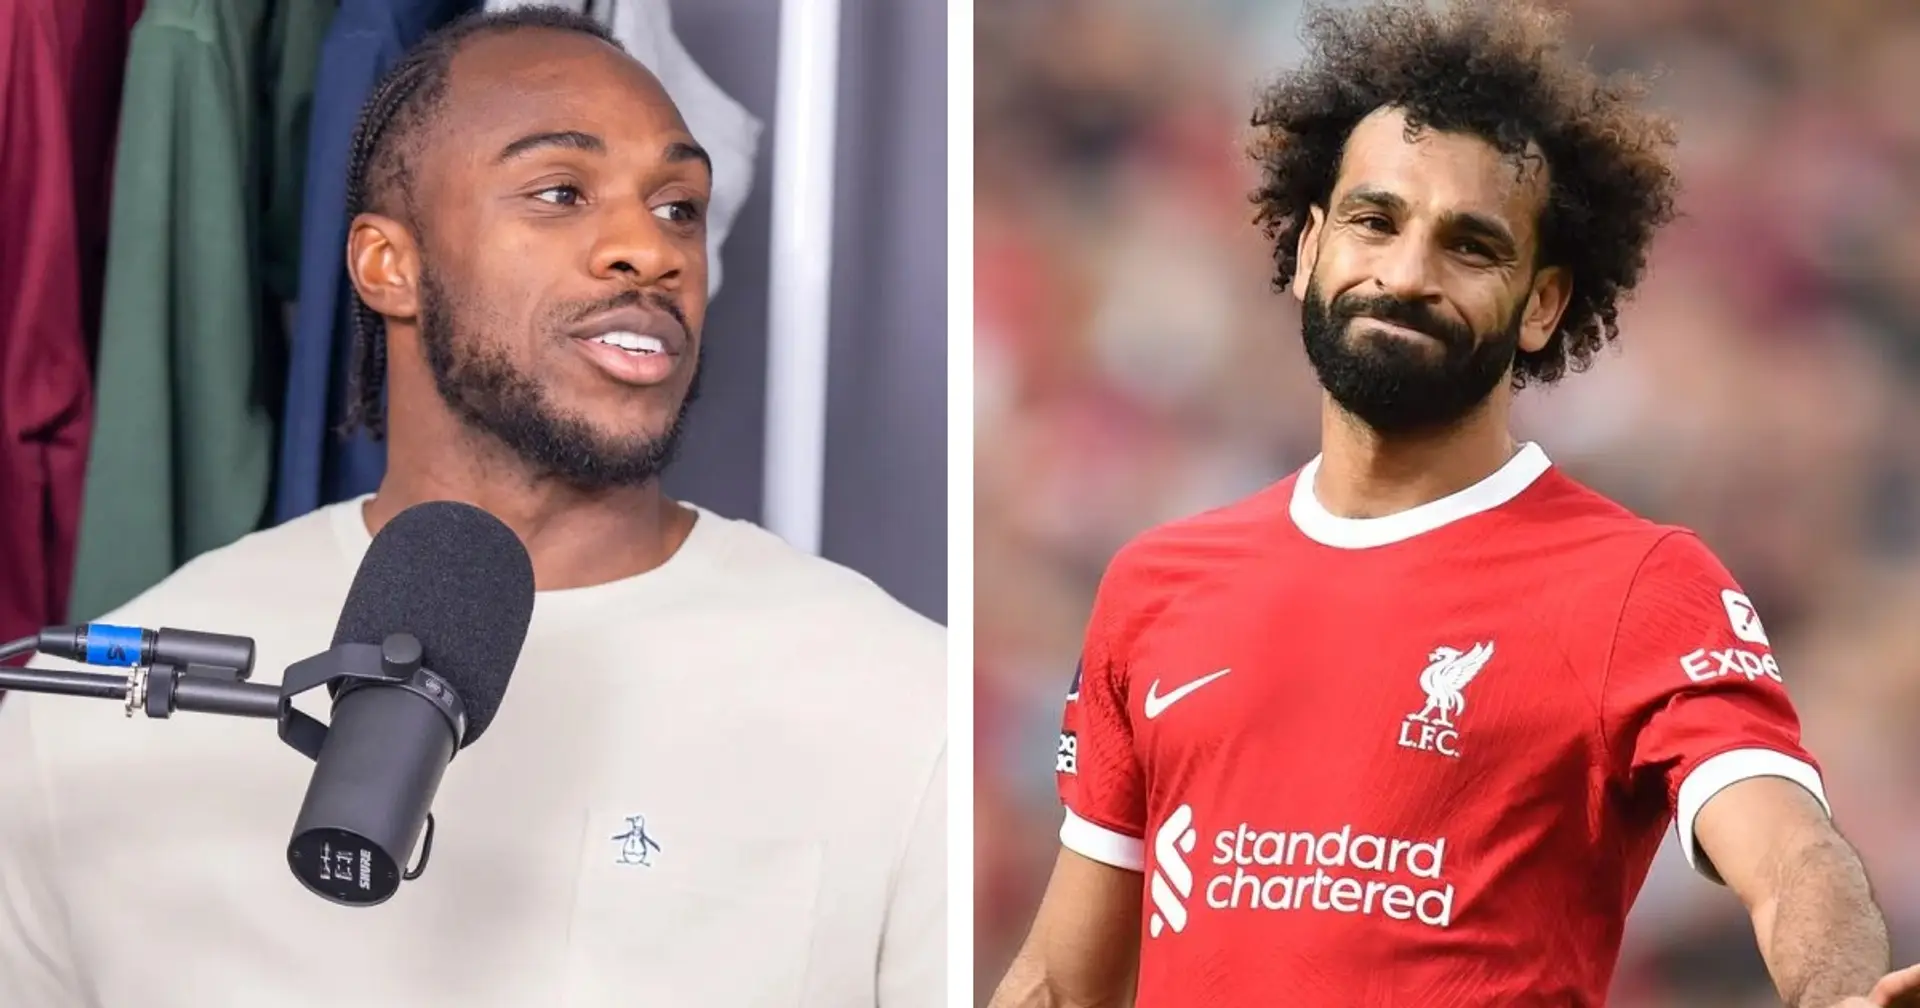 'Give us all your Salah money': Antonio urges Liverpool to sign teammate as 'perfect replacement' for winger